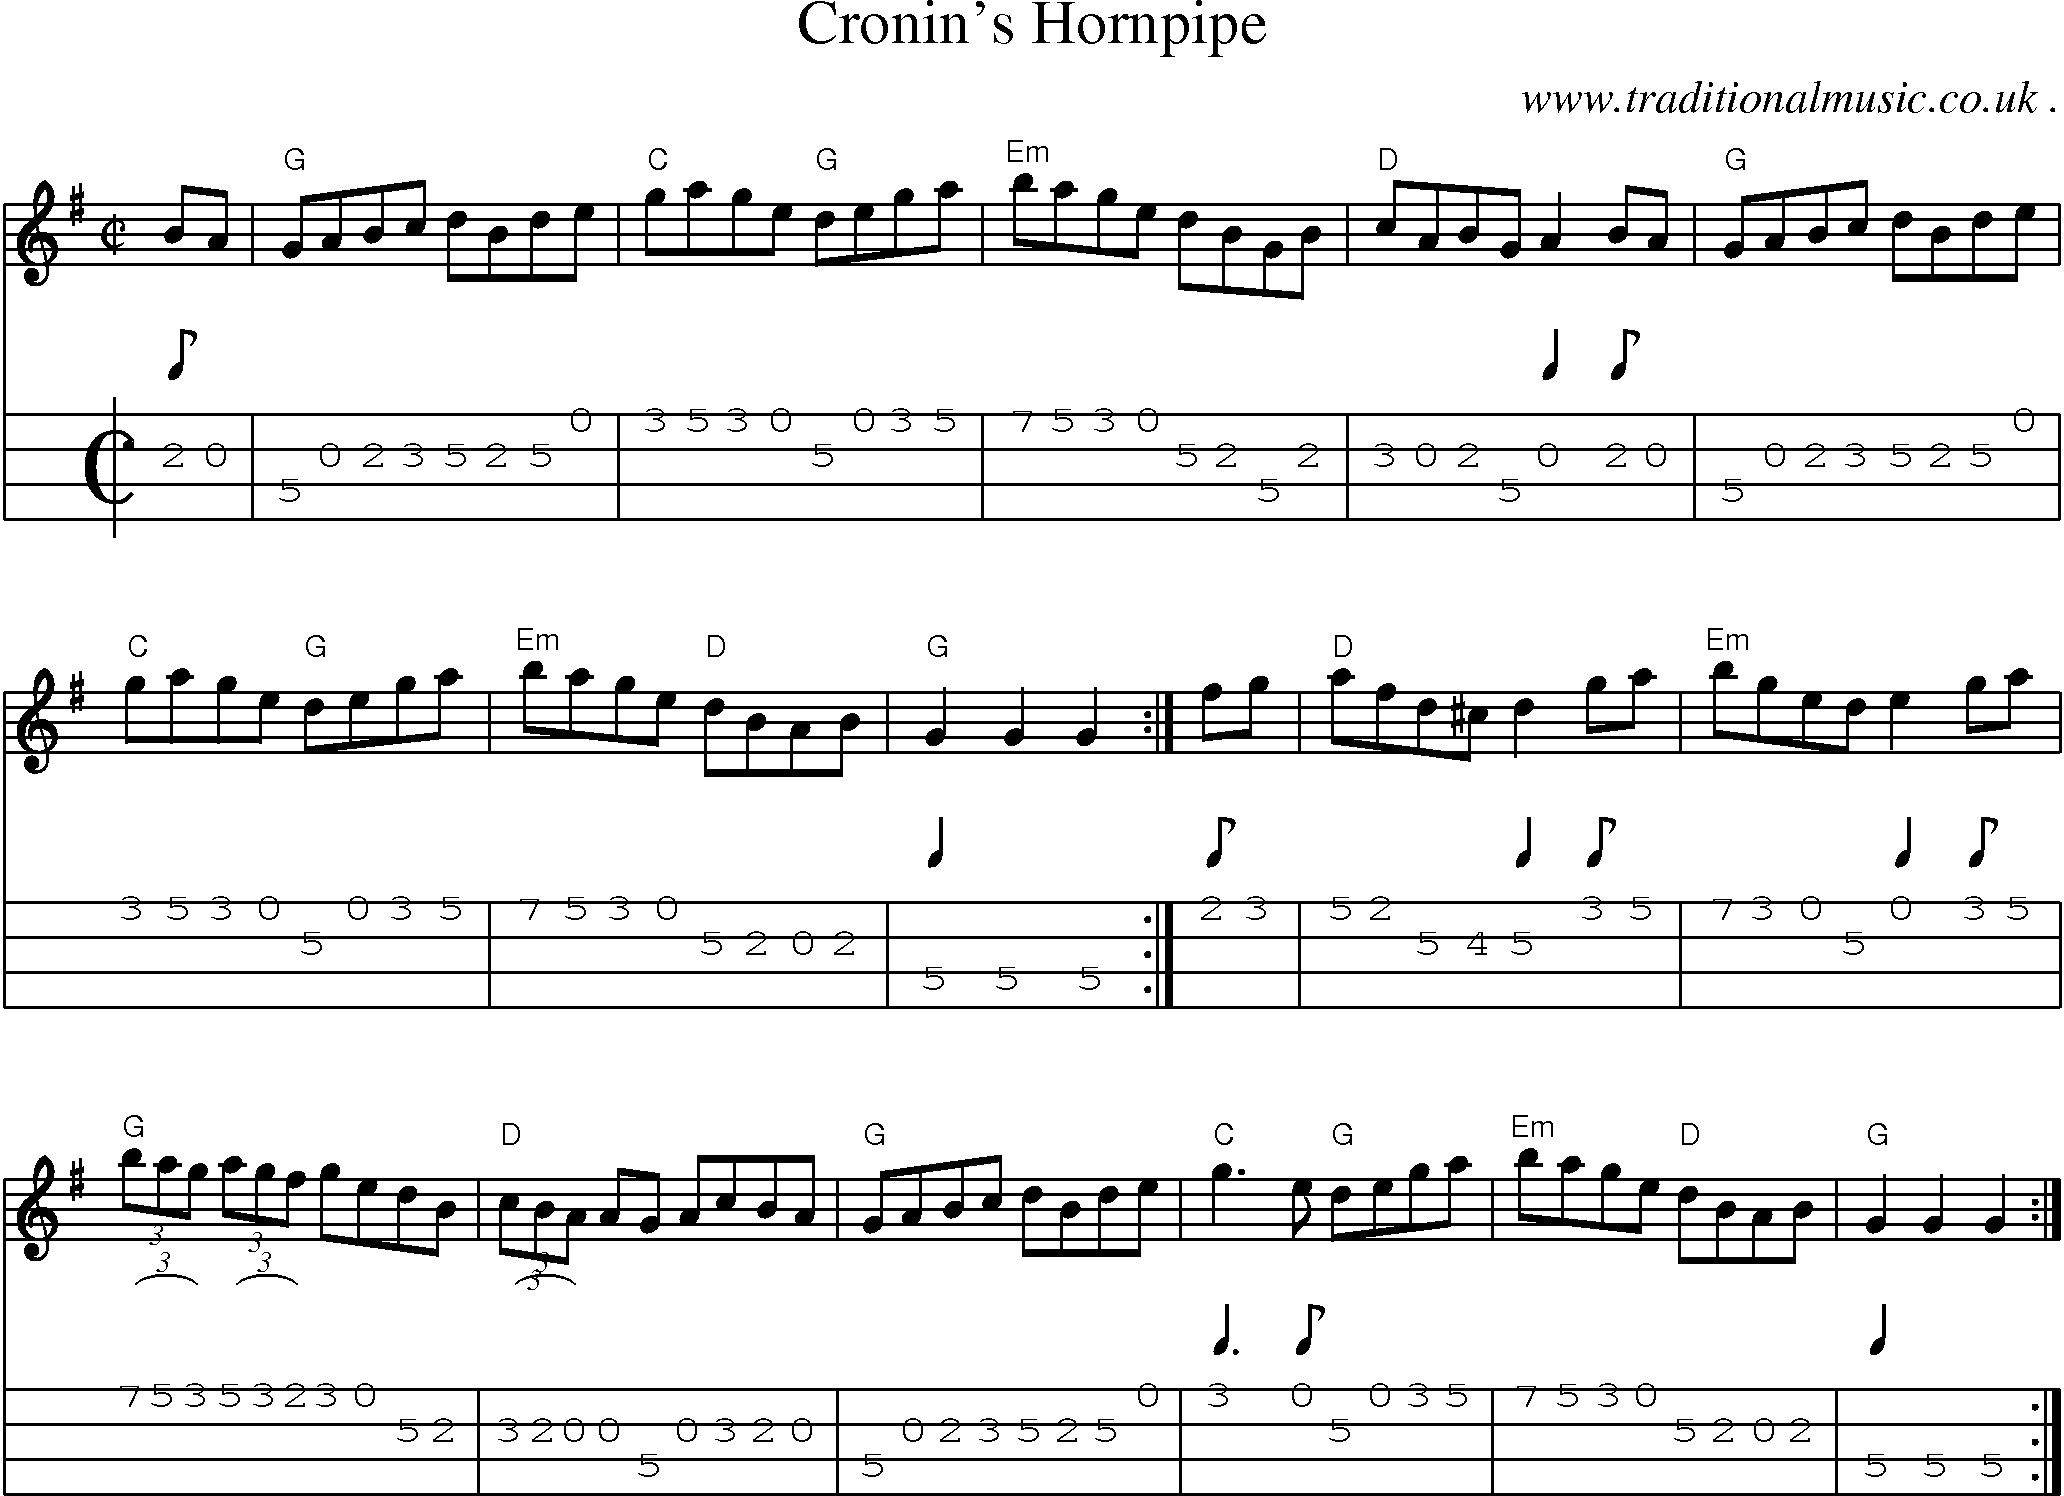 Music Score and Guitar Tabs for Cronins Hornpipe